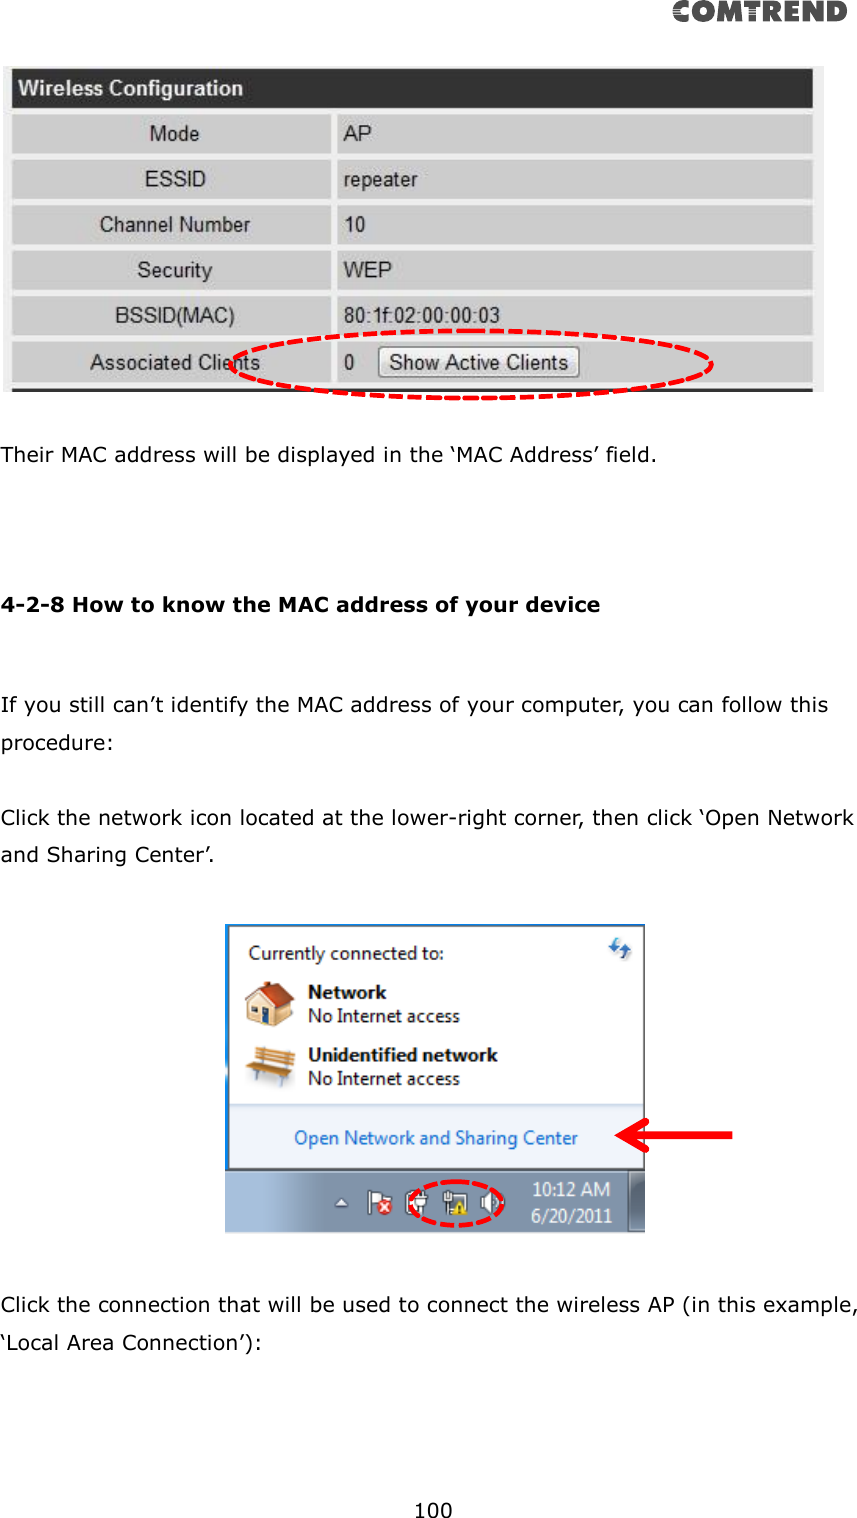       100    Their MAC address will be displayed in the ‘MAC Address’ field.    4-2-8 How to know the MAC address of your device  If you still can’t identify the MAC address of your computer, you can follow this procedure:  Click the network icon located at the lower-right corner, then click ‘Open Network and Sharing Center’.    Click the connection that will be used to connect the wireless AP (in this example, ‘Local Area Connection’):  